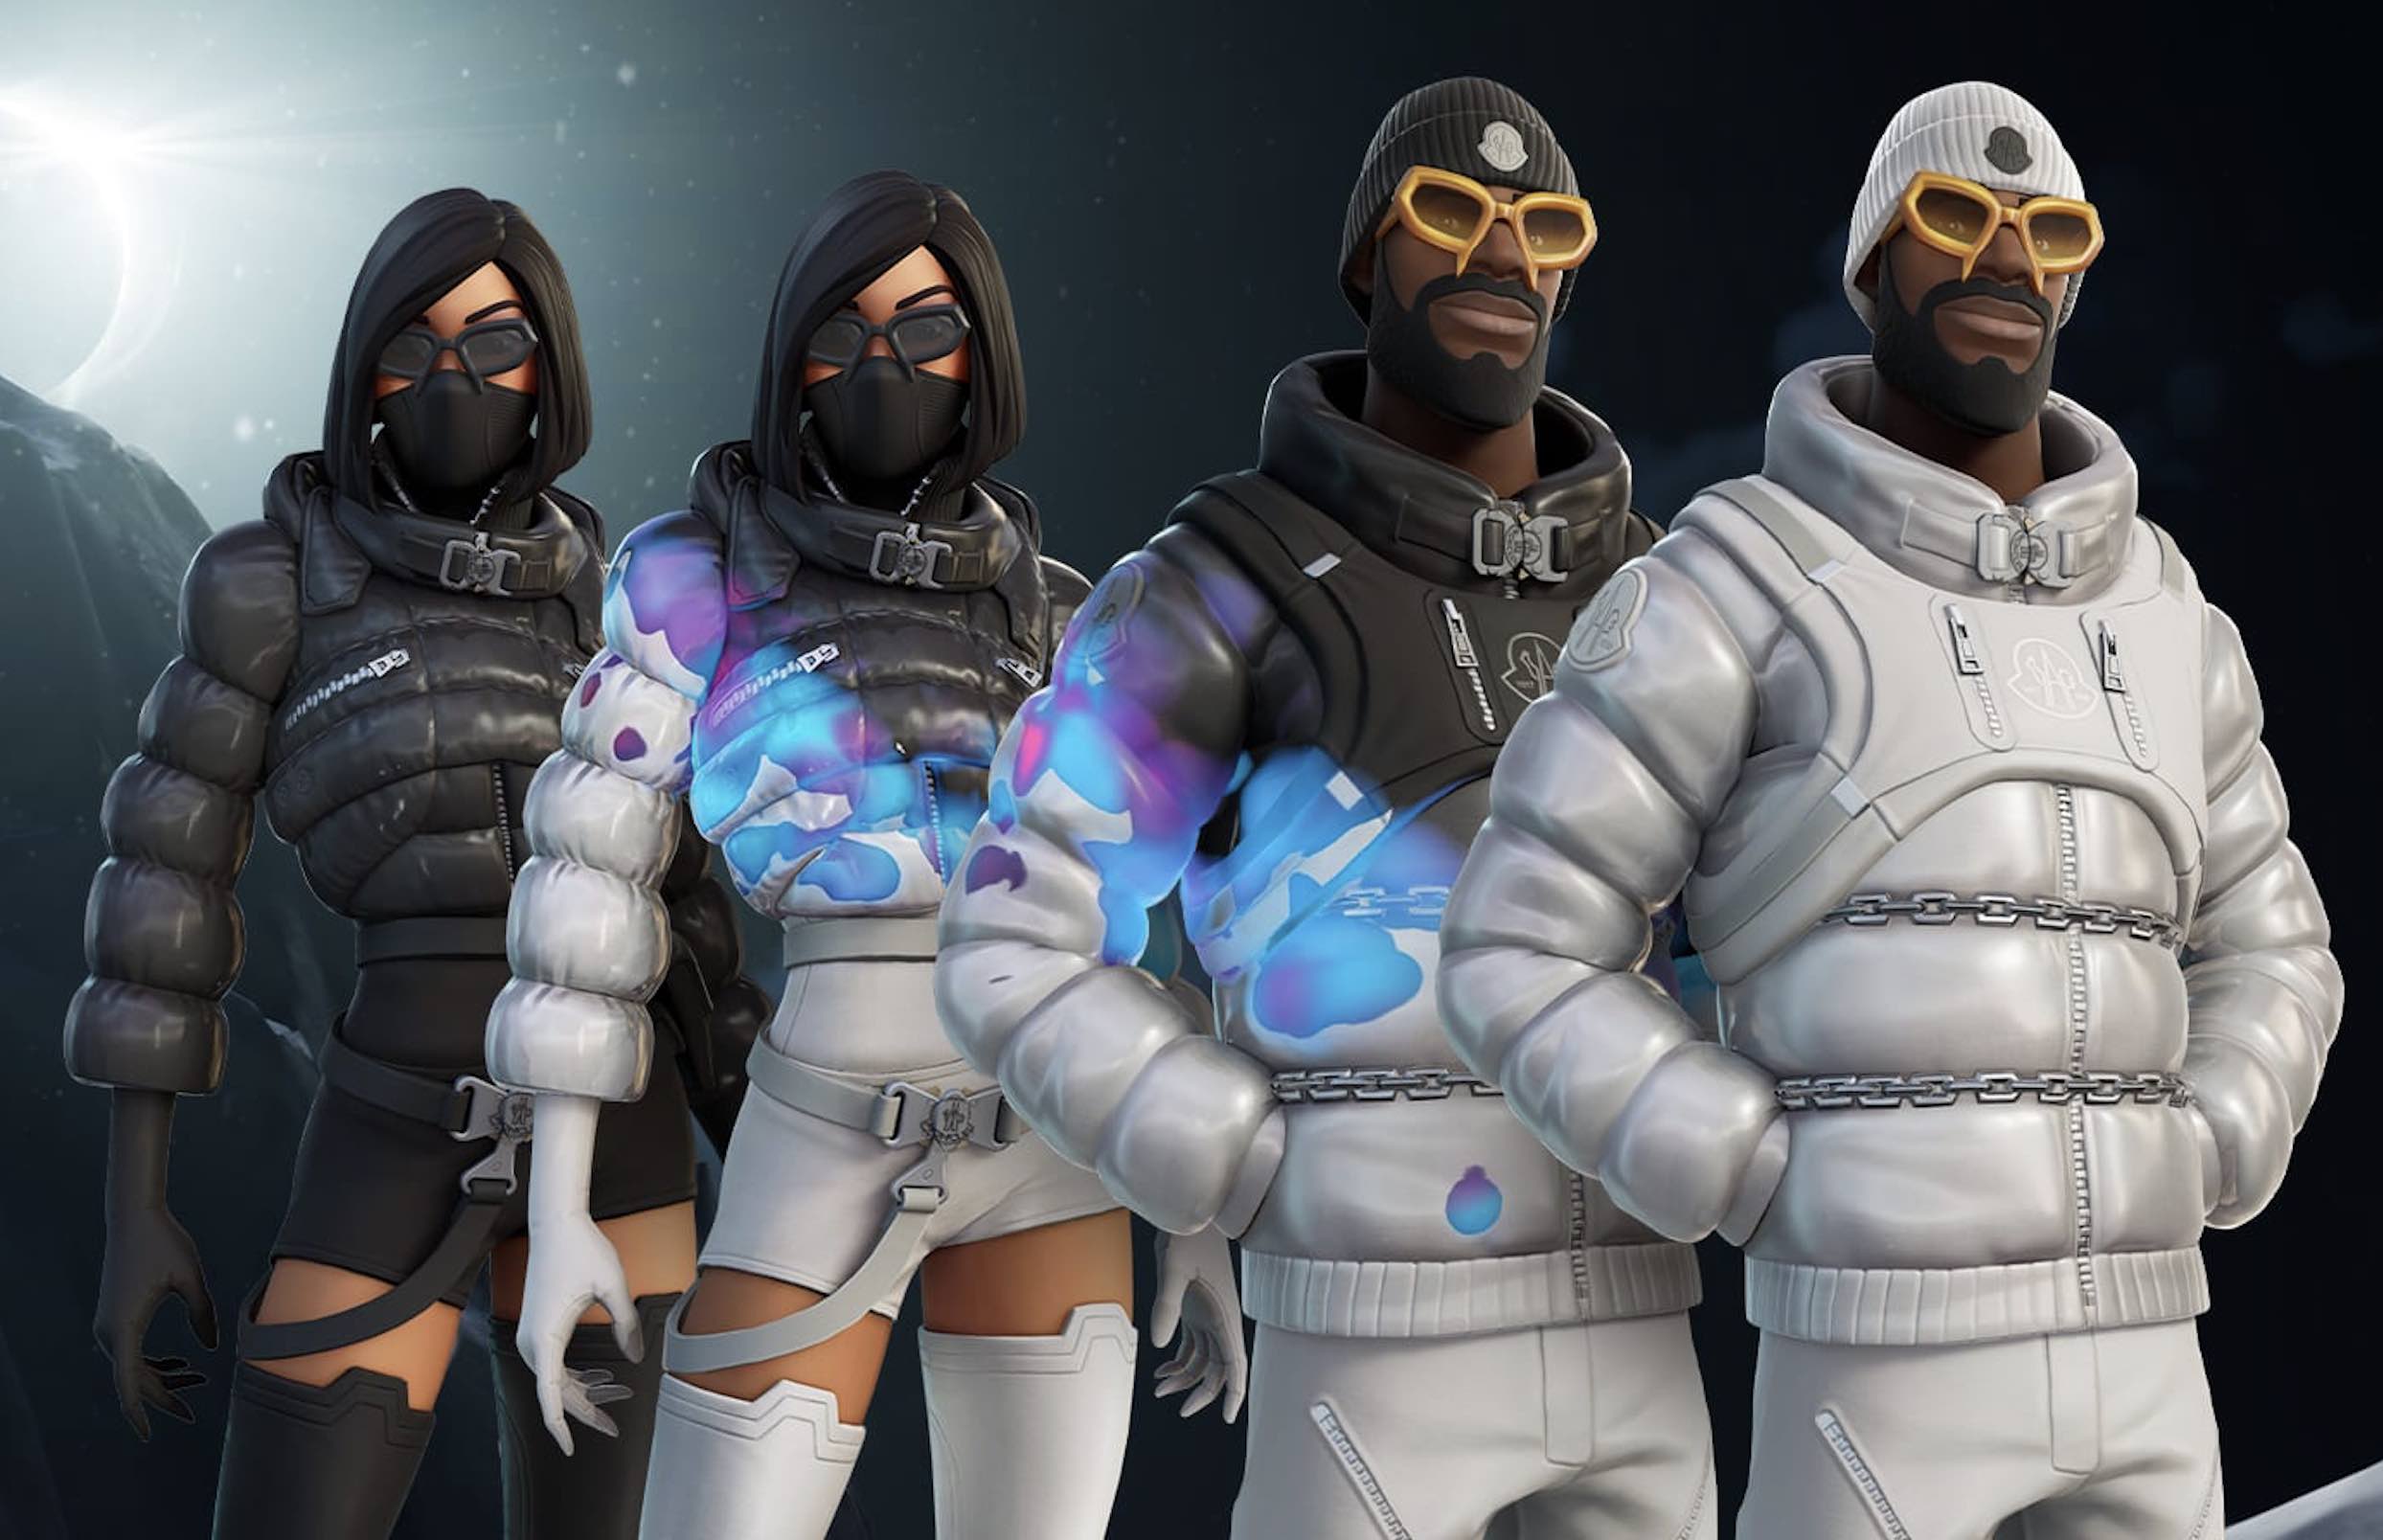 In November 2021, Fortnite developer Epic Games launched new Moncler attire inspired by the brand's collection with 1017 Alyx 9SM